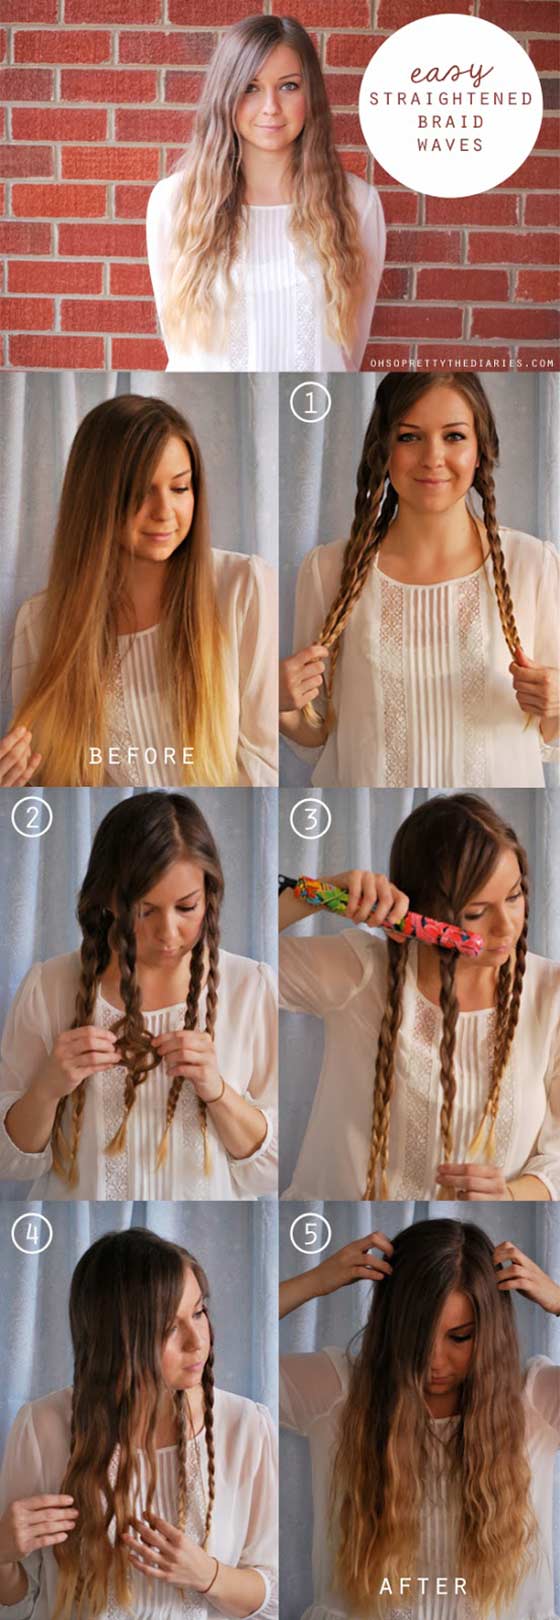 10 Techniques To Get Chic Wavy Hair